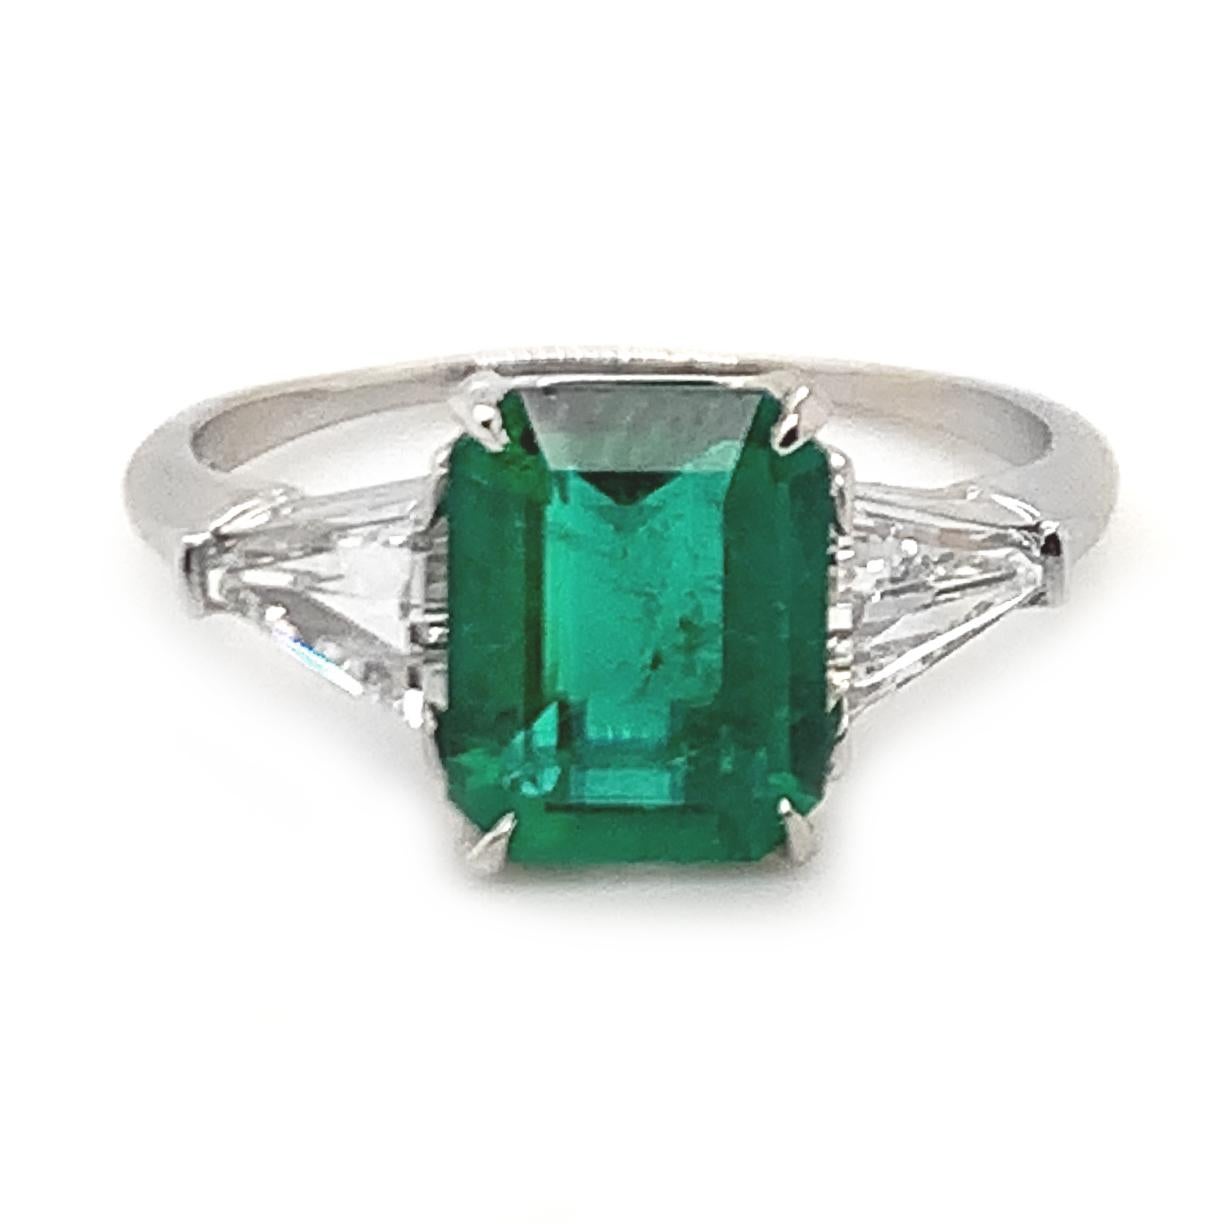 Breathtaking handmade emerald and diamond  engagement ring.  Set in platinum.  Centered with an AGL (American Gemological Laboratories) certified natural emerald-cut emerald that weighs 1.60 carats. This magnificent deep saturated color is natural